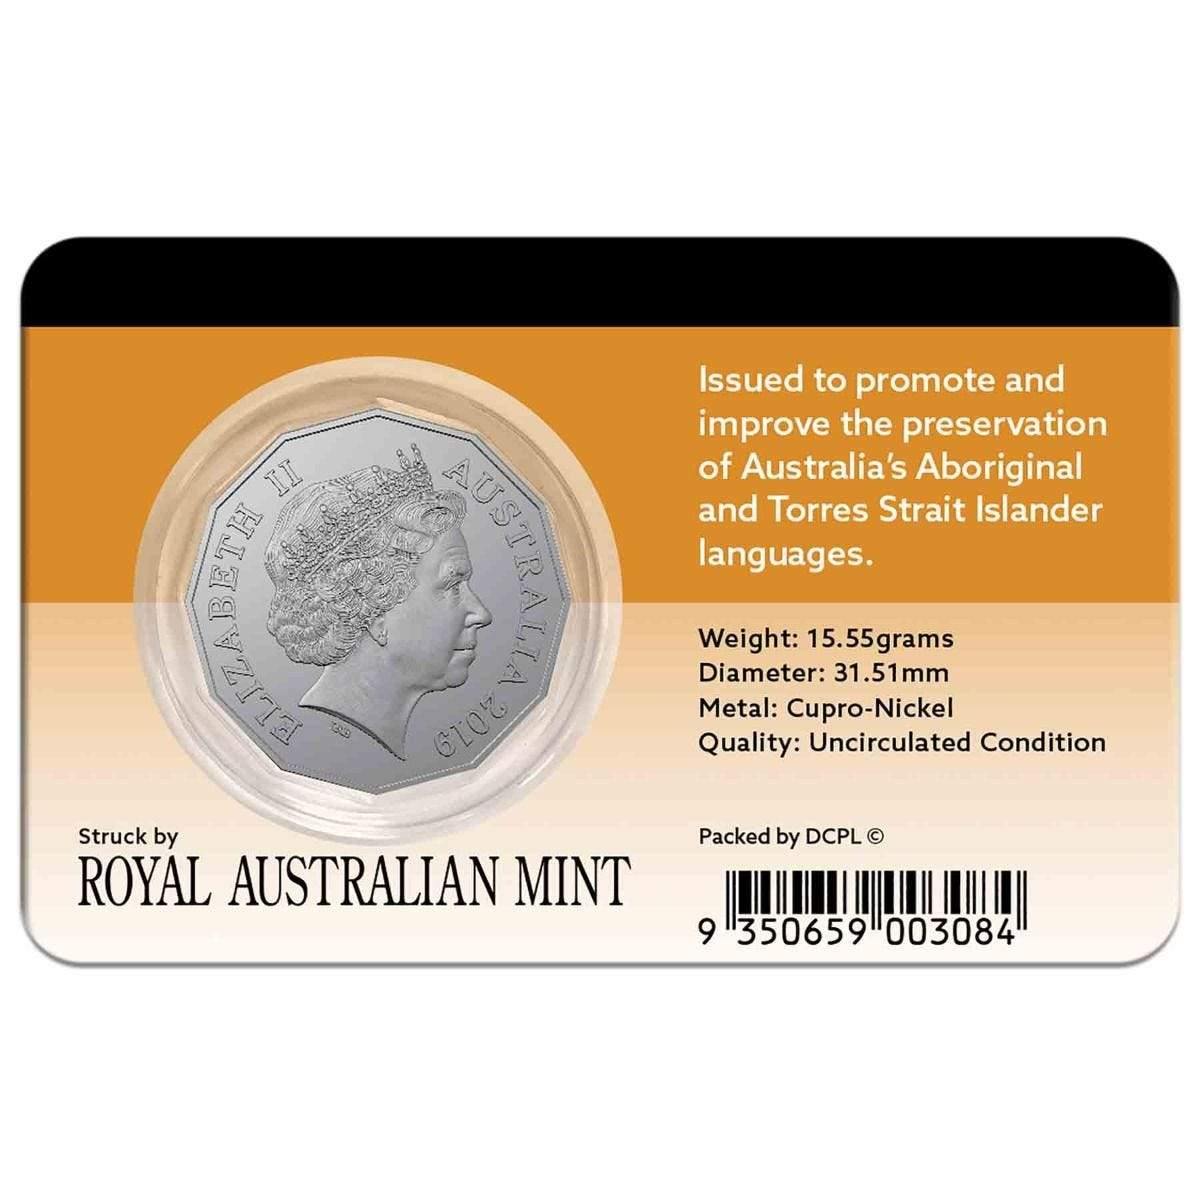 2019 Australian Fifty Cent Coin - International Year of Indigenous Languages Coin Pack - Loose Change Coins